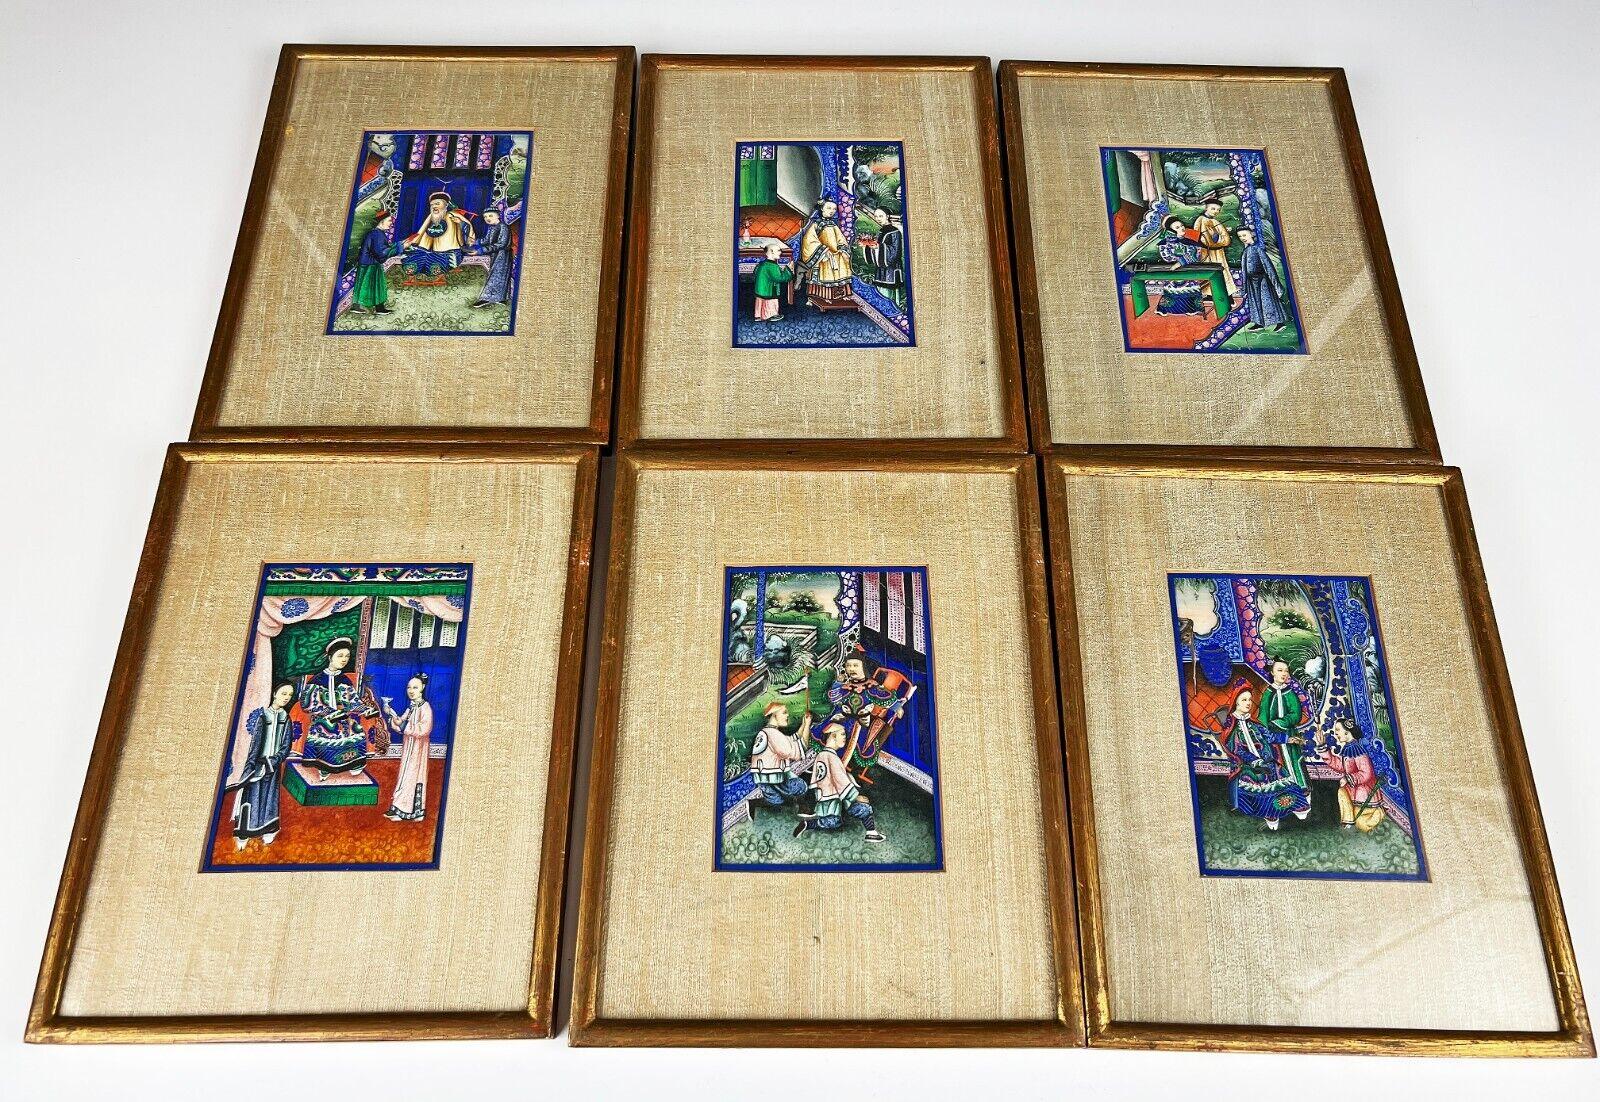 This listing is for a beautiful set of Chinese Export Gouache (watercolor) Paintings on Rice/Pith Papers dating to the 19th century that have been framed under glass. The detail in the work is excellent and the paintings show great colors. The